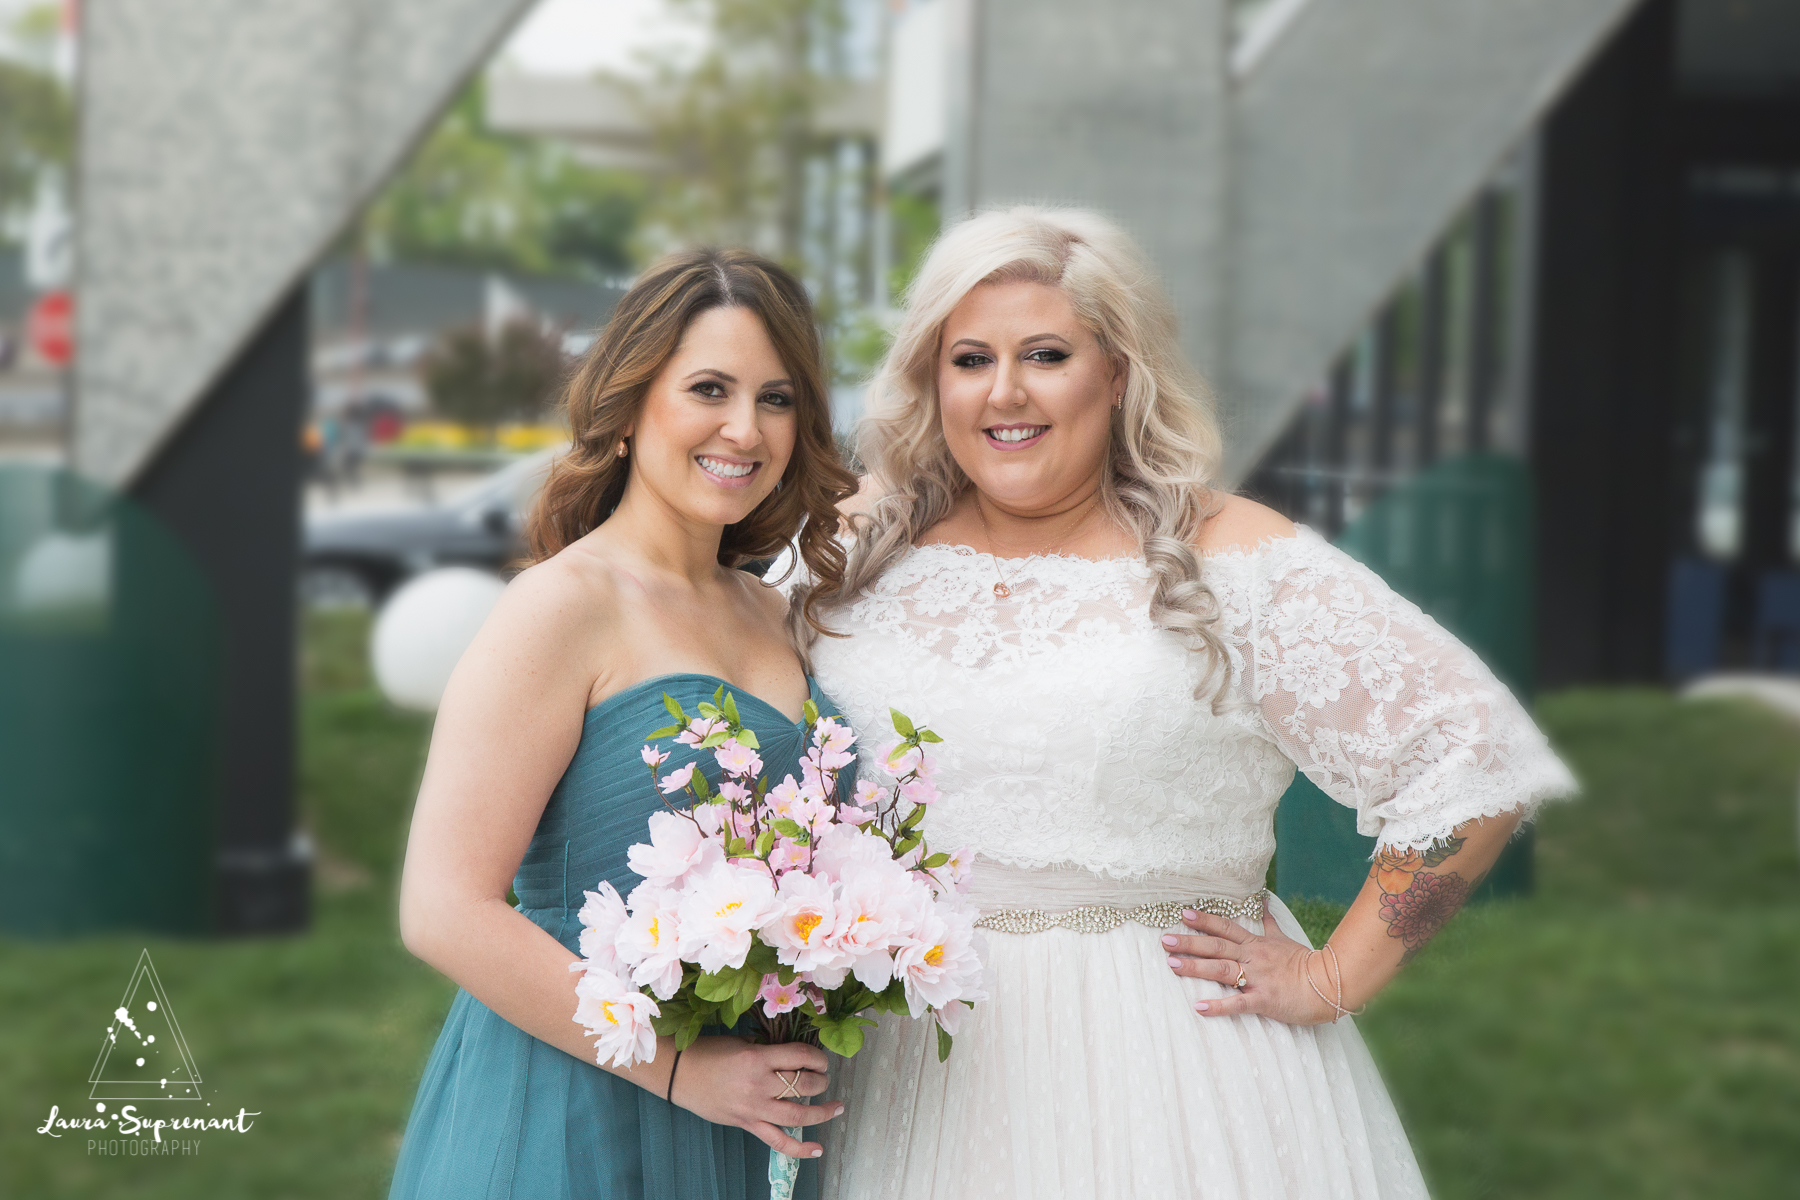 wedding_photography_chicago_wrigley_field_ravenswood_event_center_laura_suprenant (8 of 82).jpg